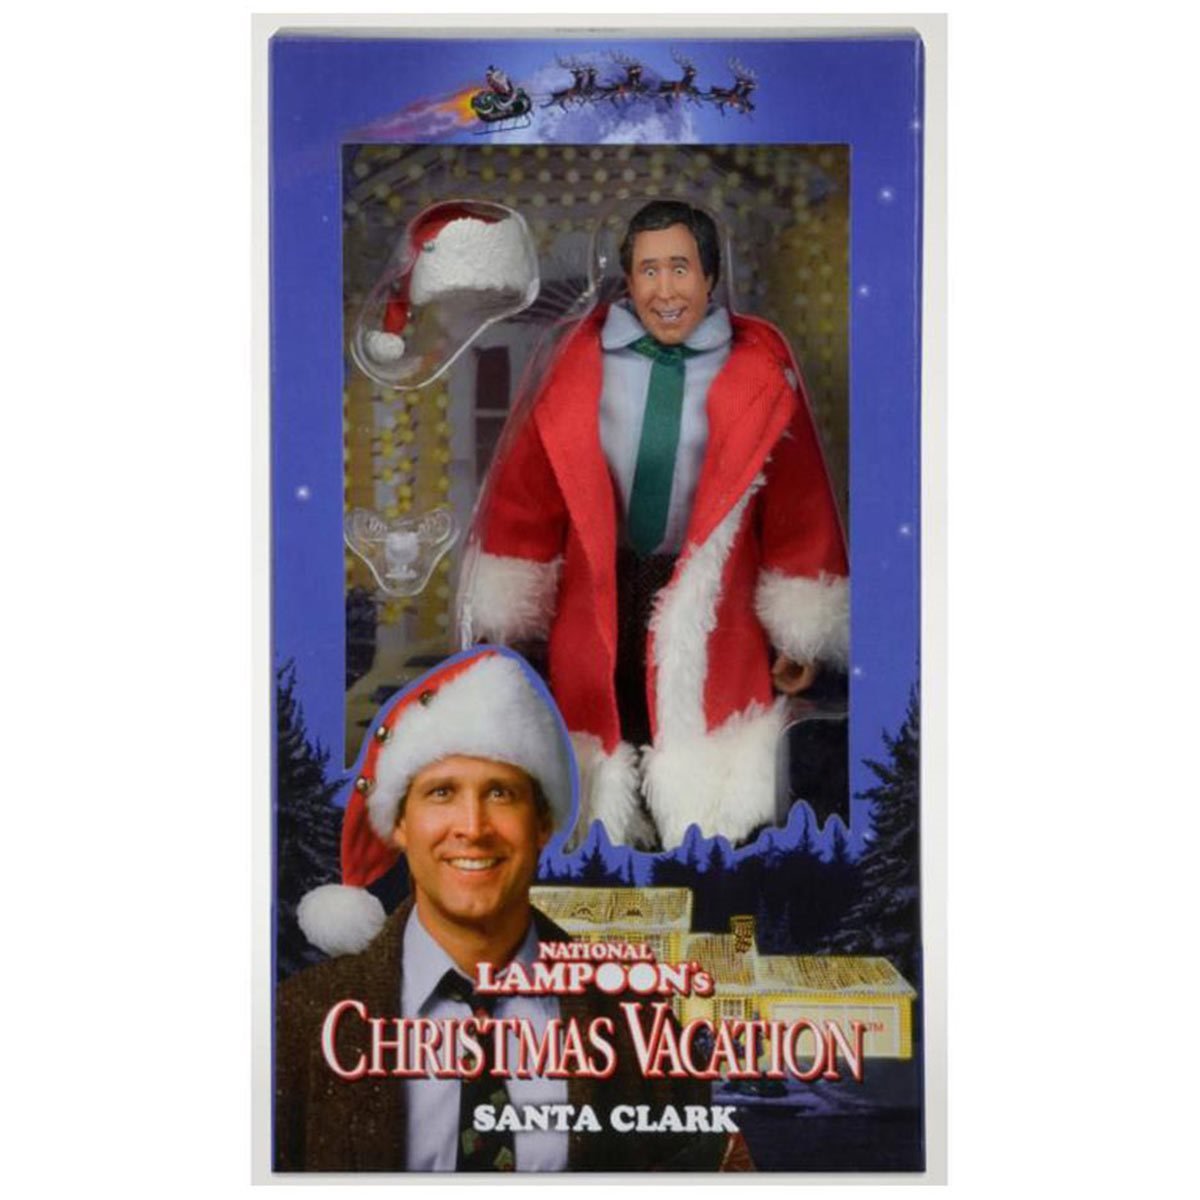 Halloween Town on X: Start the holidays off right with the Christmas  Vacation Clark W. Griswold figure complete with chainsaw and hockey mask!🎄👻  #christmasvacation #clarkgriswold #shittersfullclark  #halloweentown#toycollector